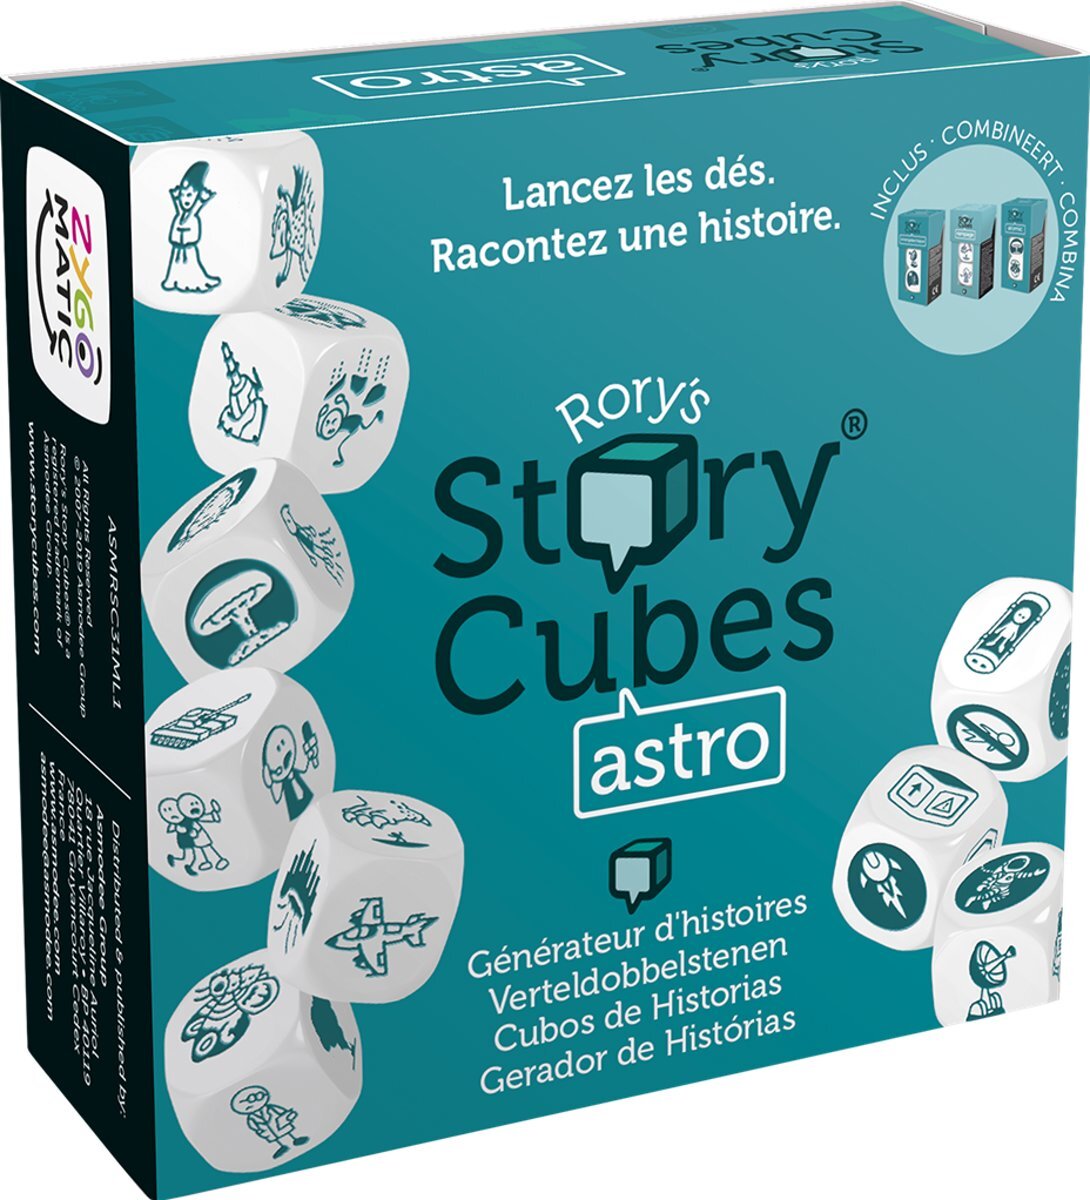 Zygomatic Rory's Story Cubes - Astro